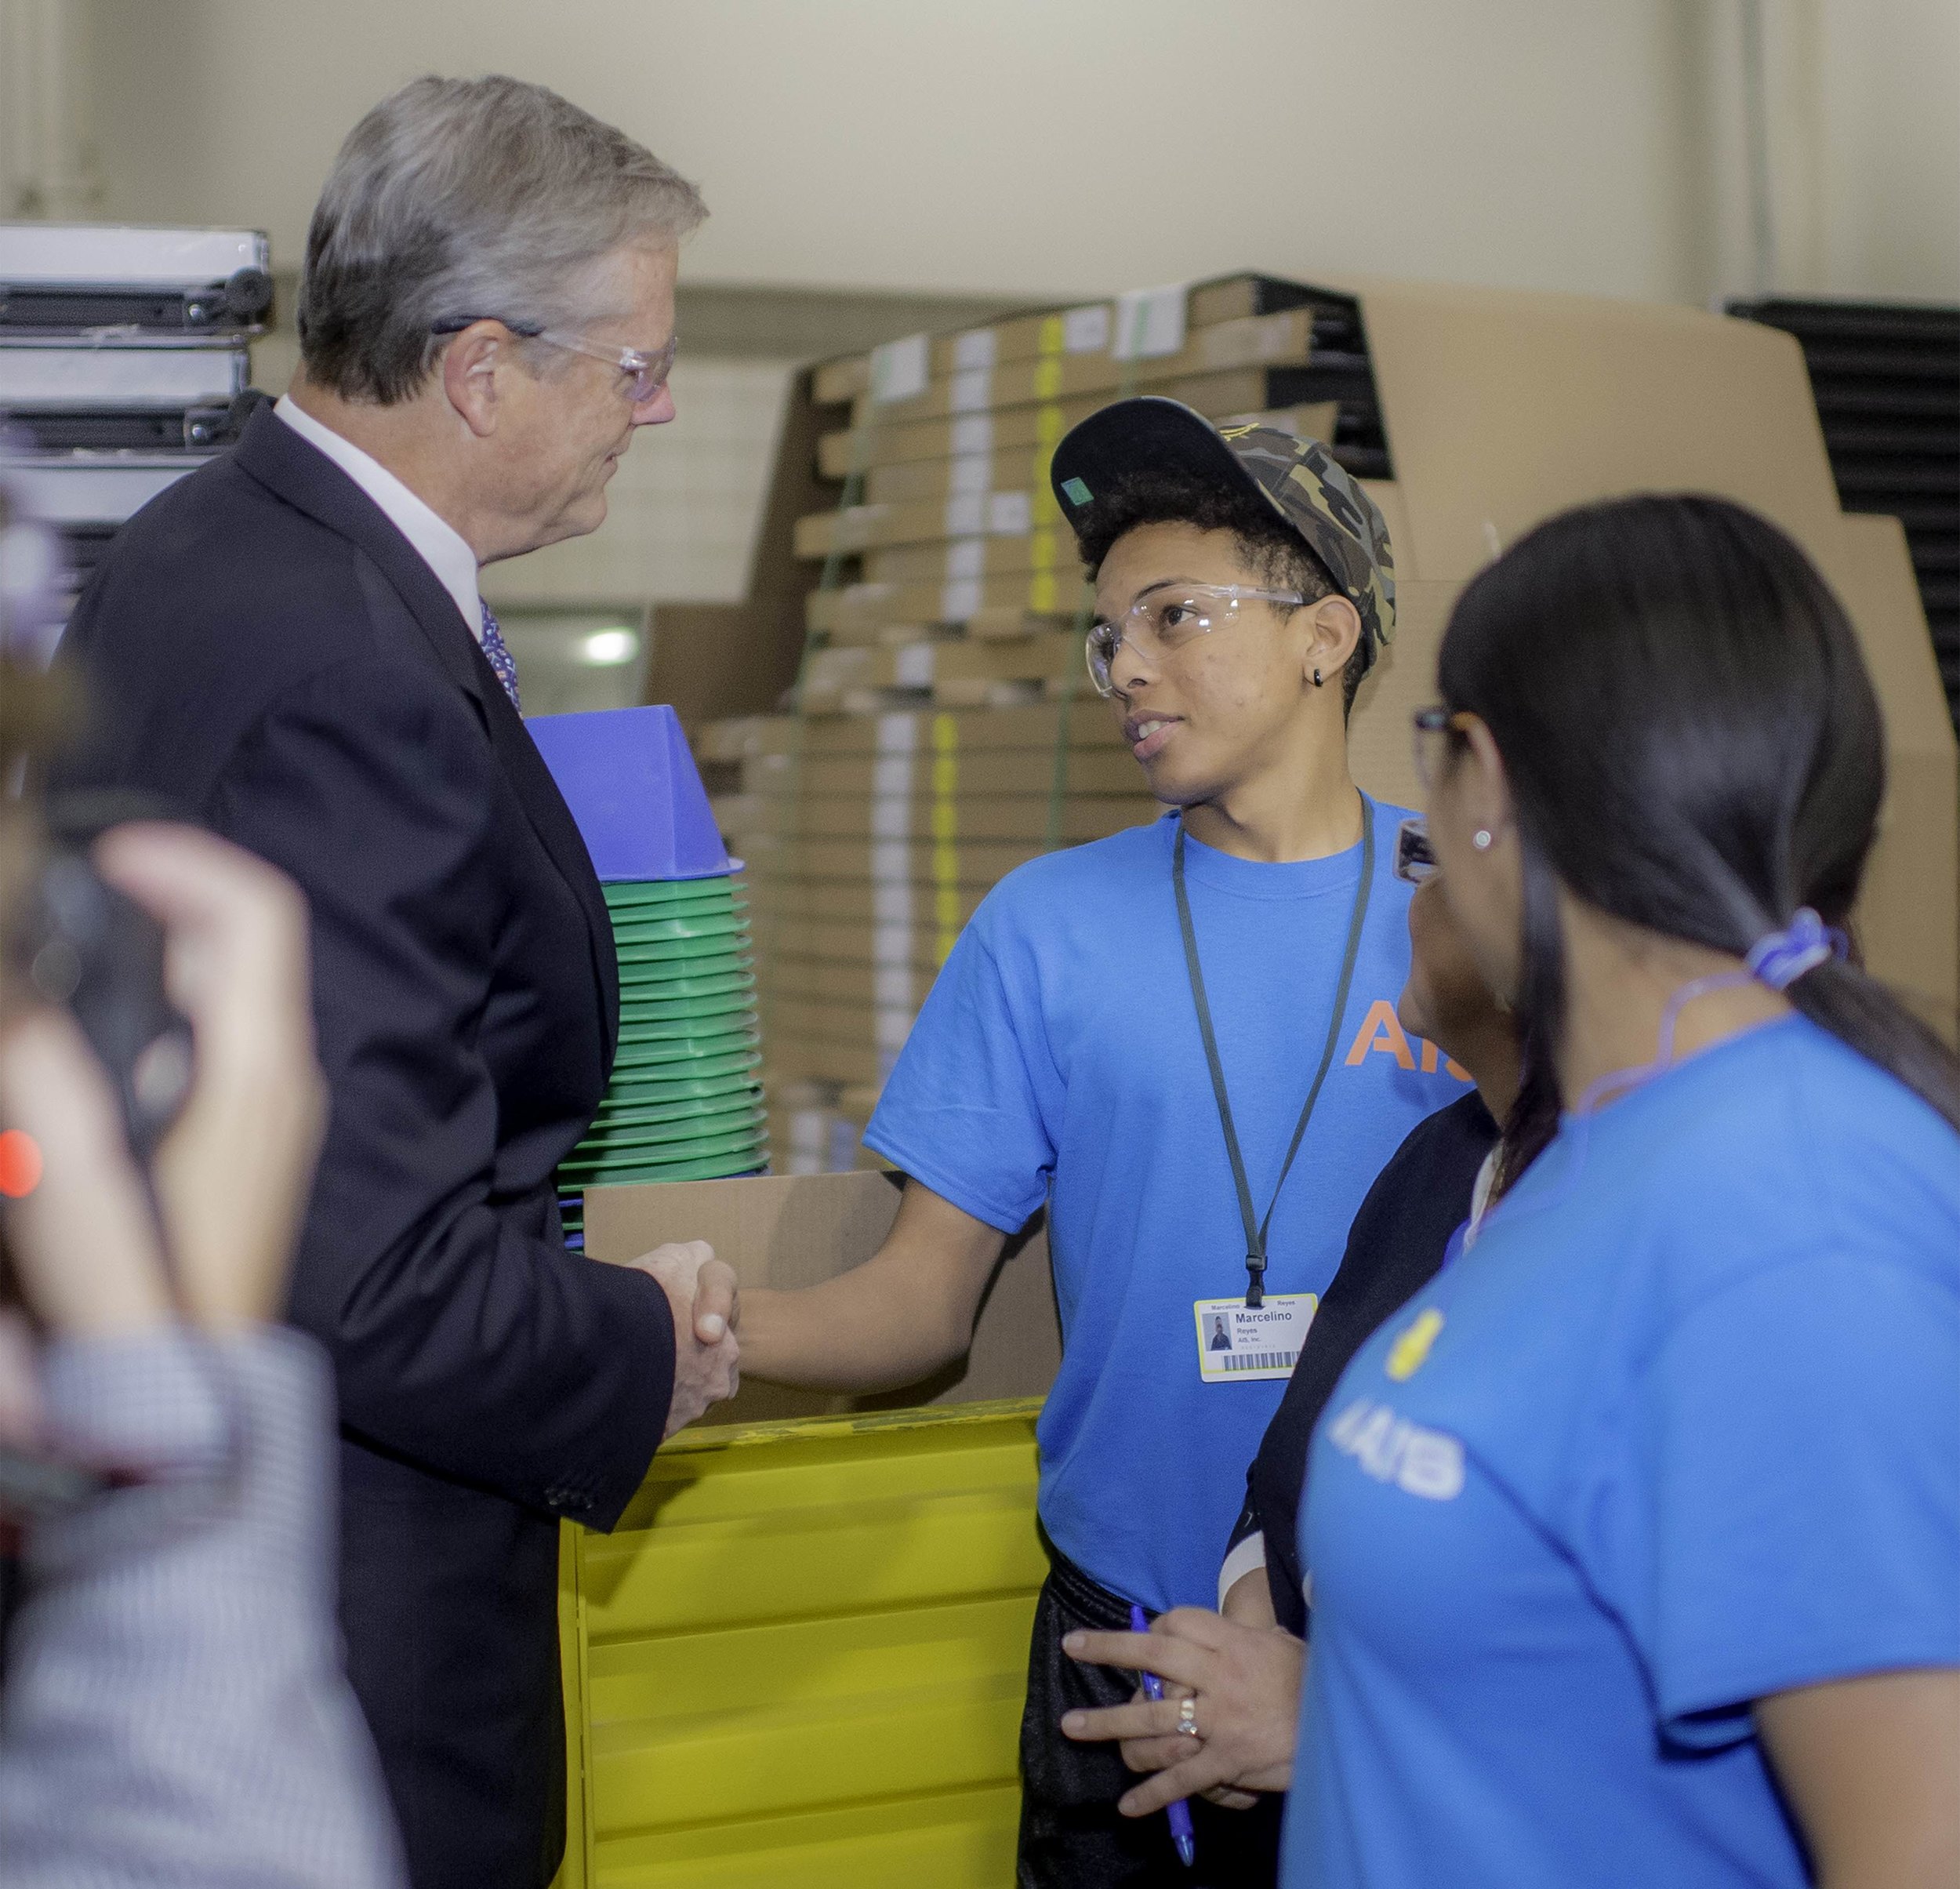  Massachusetts Governor Charlie Baker visited AIS during Manufacturing Month 